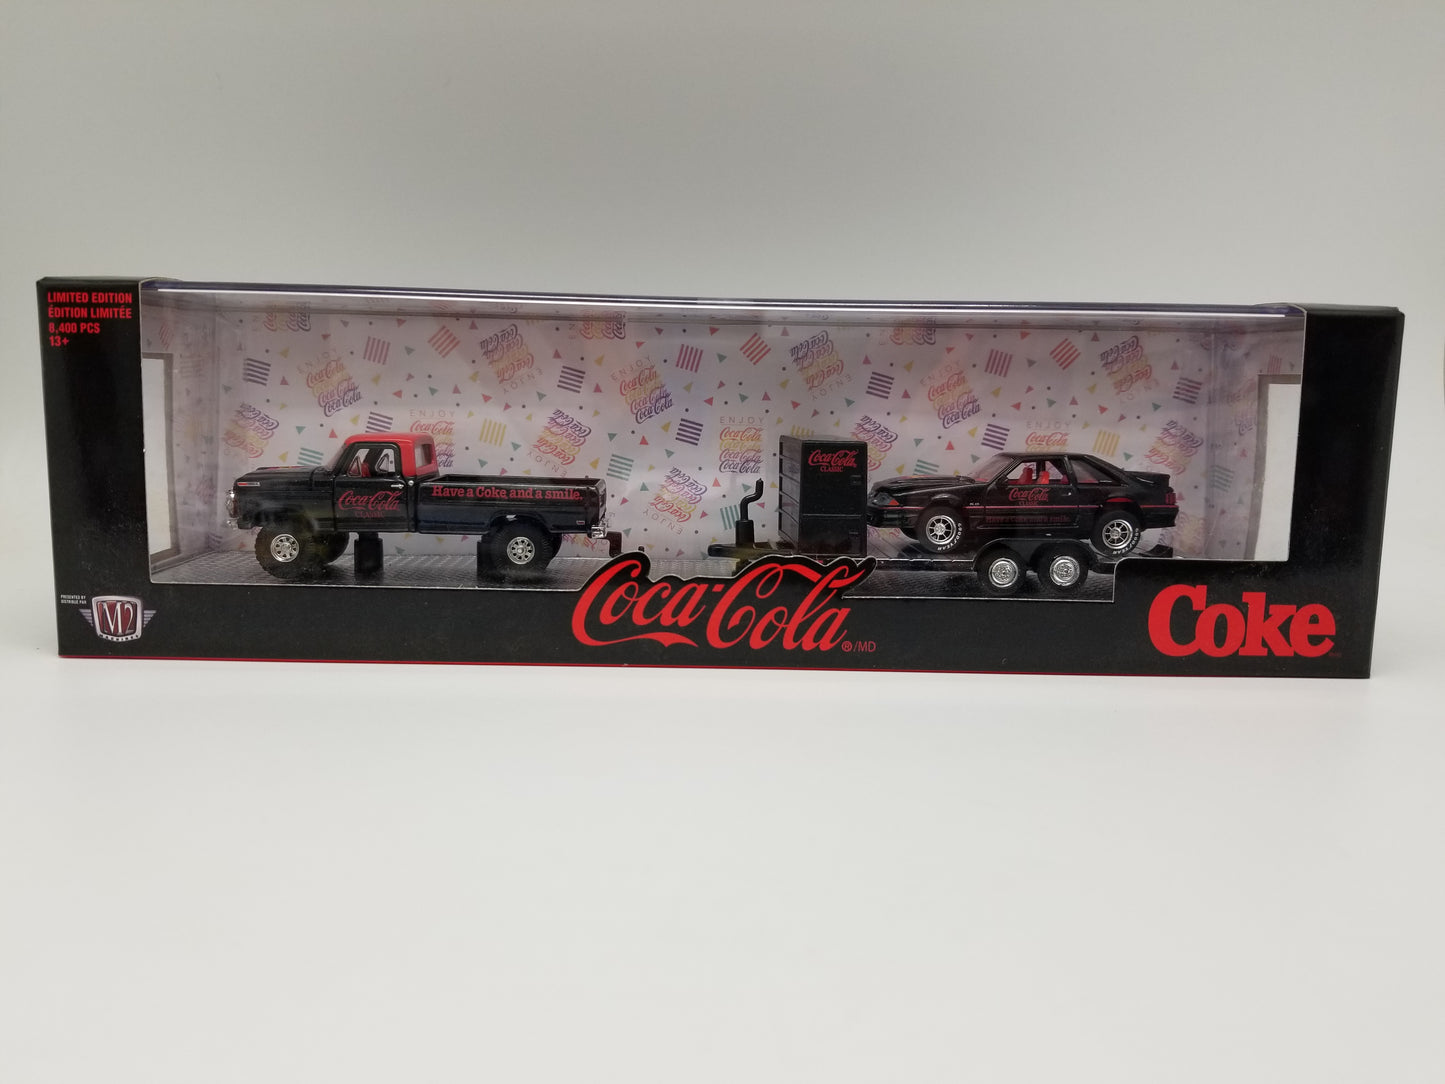 M2 1969 F-100 Ranger 4x4 & 1990 Ford Mustang GT - Coca~Cola